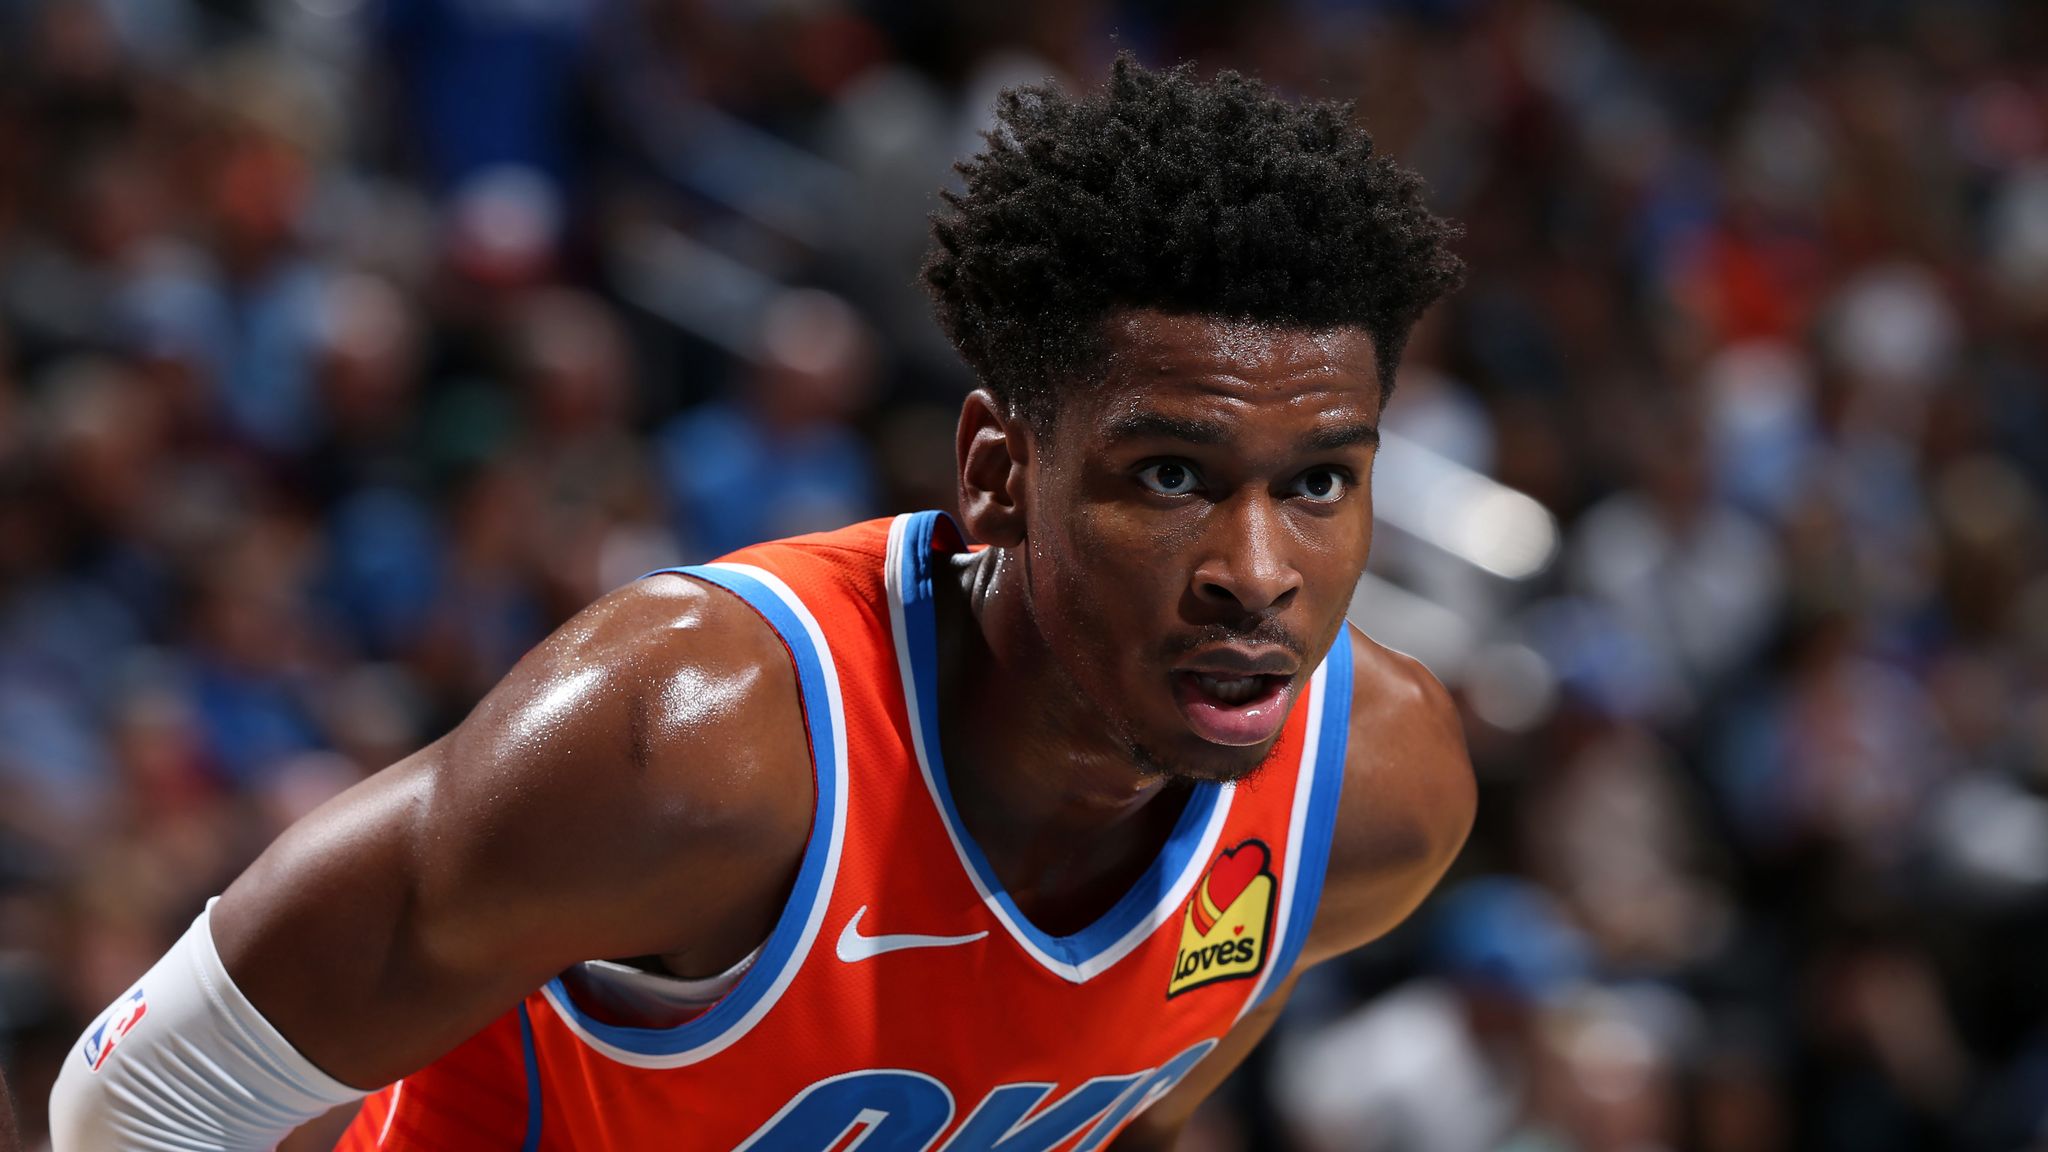 Shai Gilgeous-Alexander has grown a lot as a person, not just a player